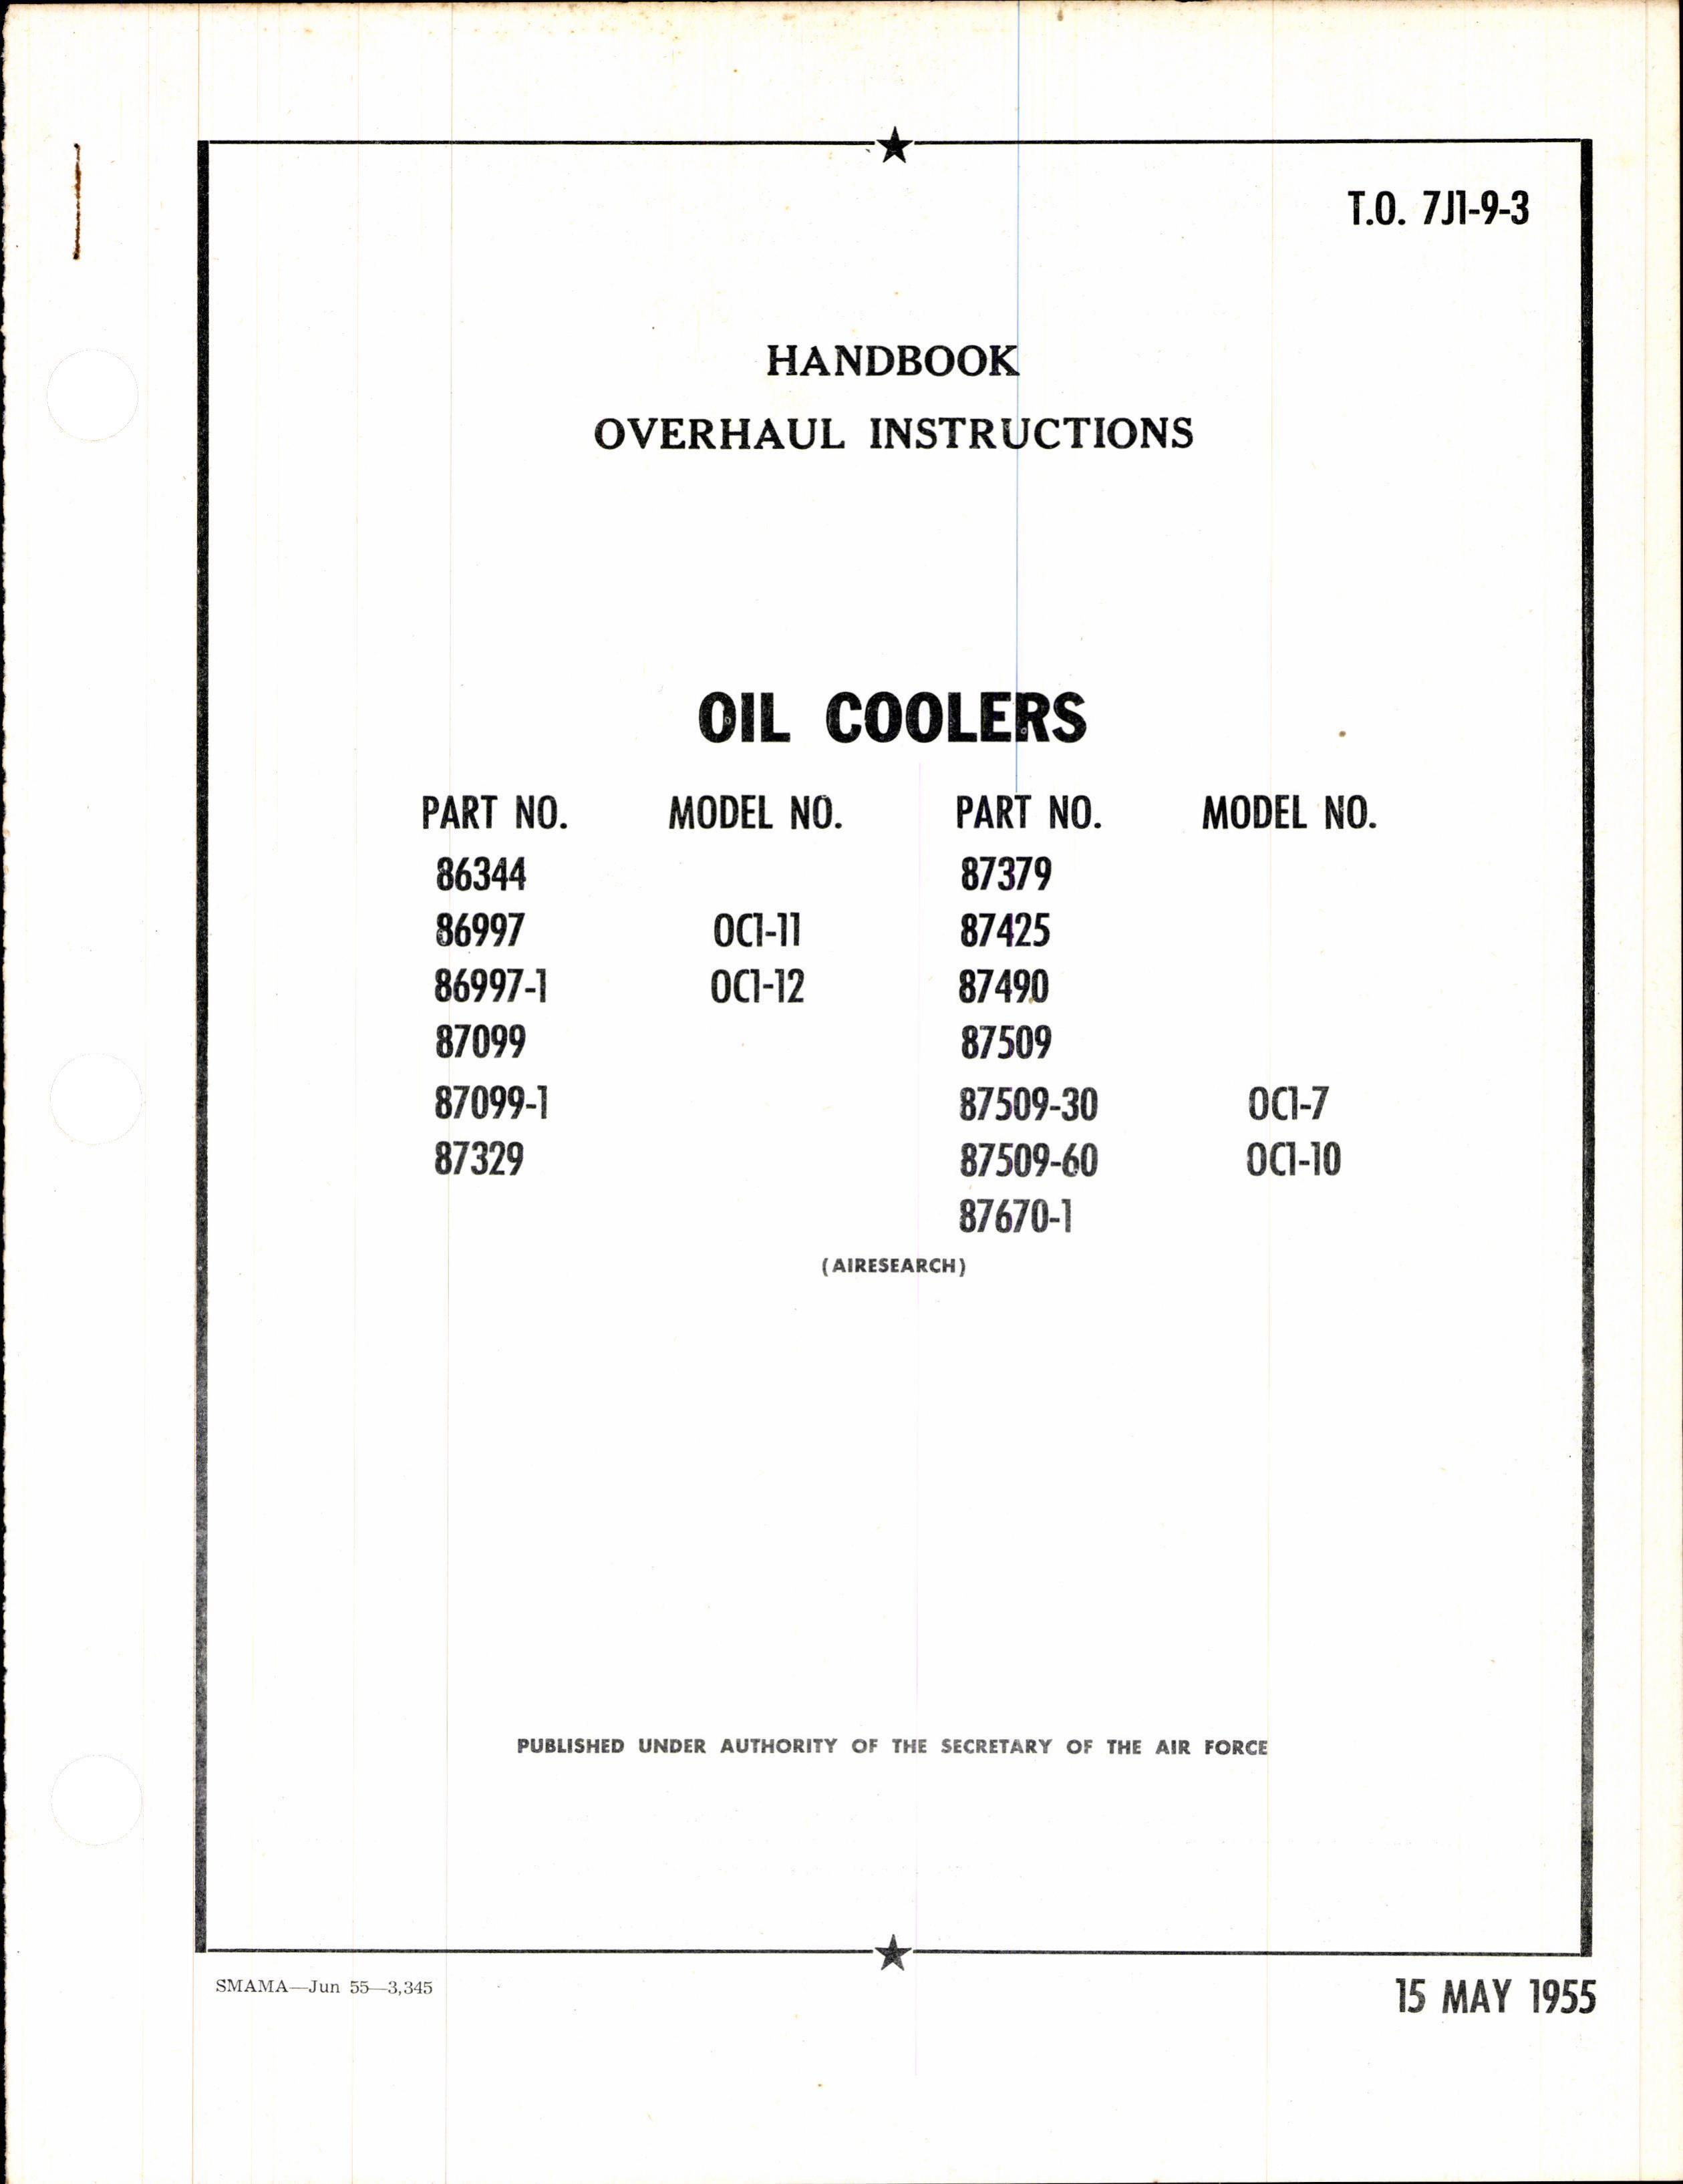 Sample page 1 from AirCorps Library document: Handbook Overhaul Instructions for Oil Coolers